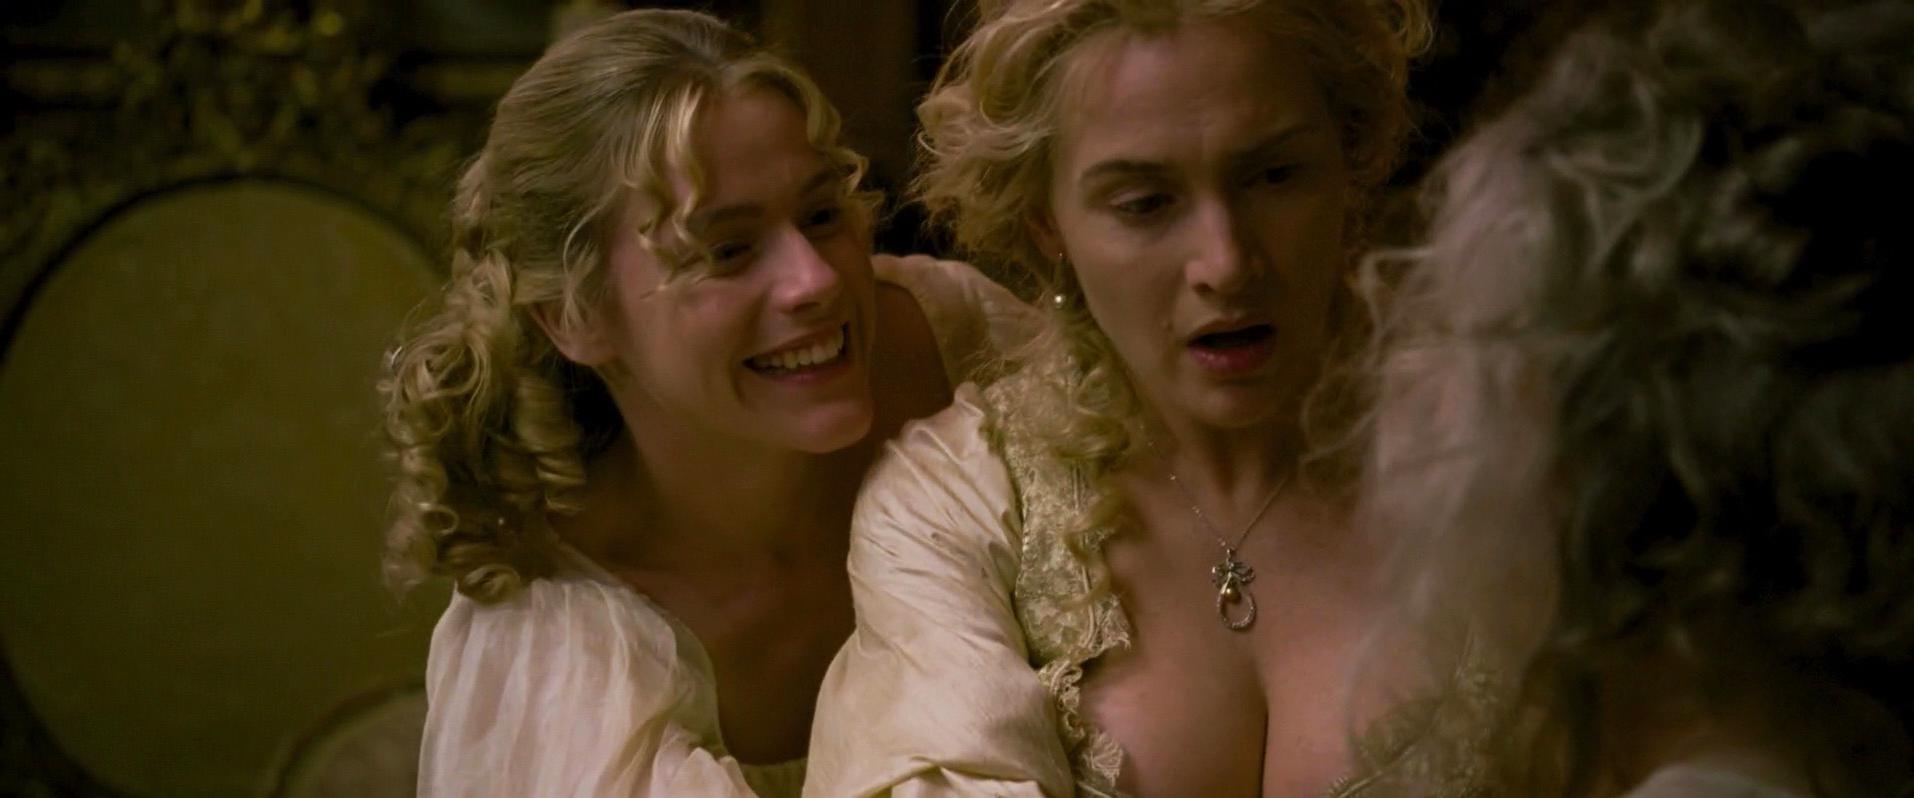 Kate Winslet nude, Kirsty Oswald nude - A Little Chaos (2014)